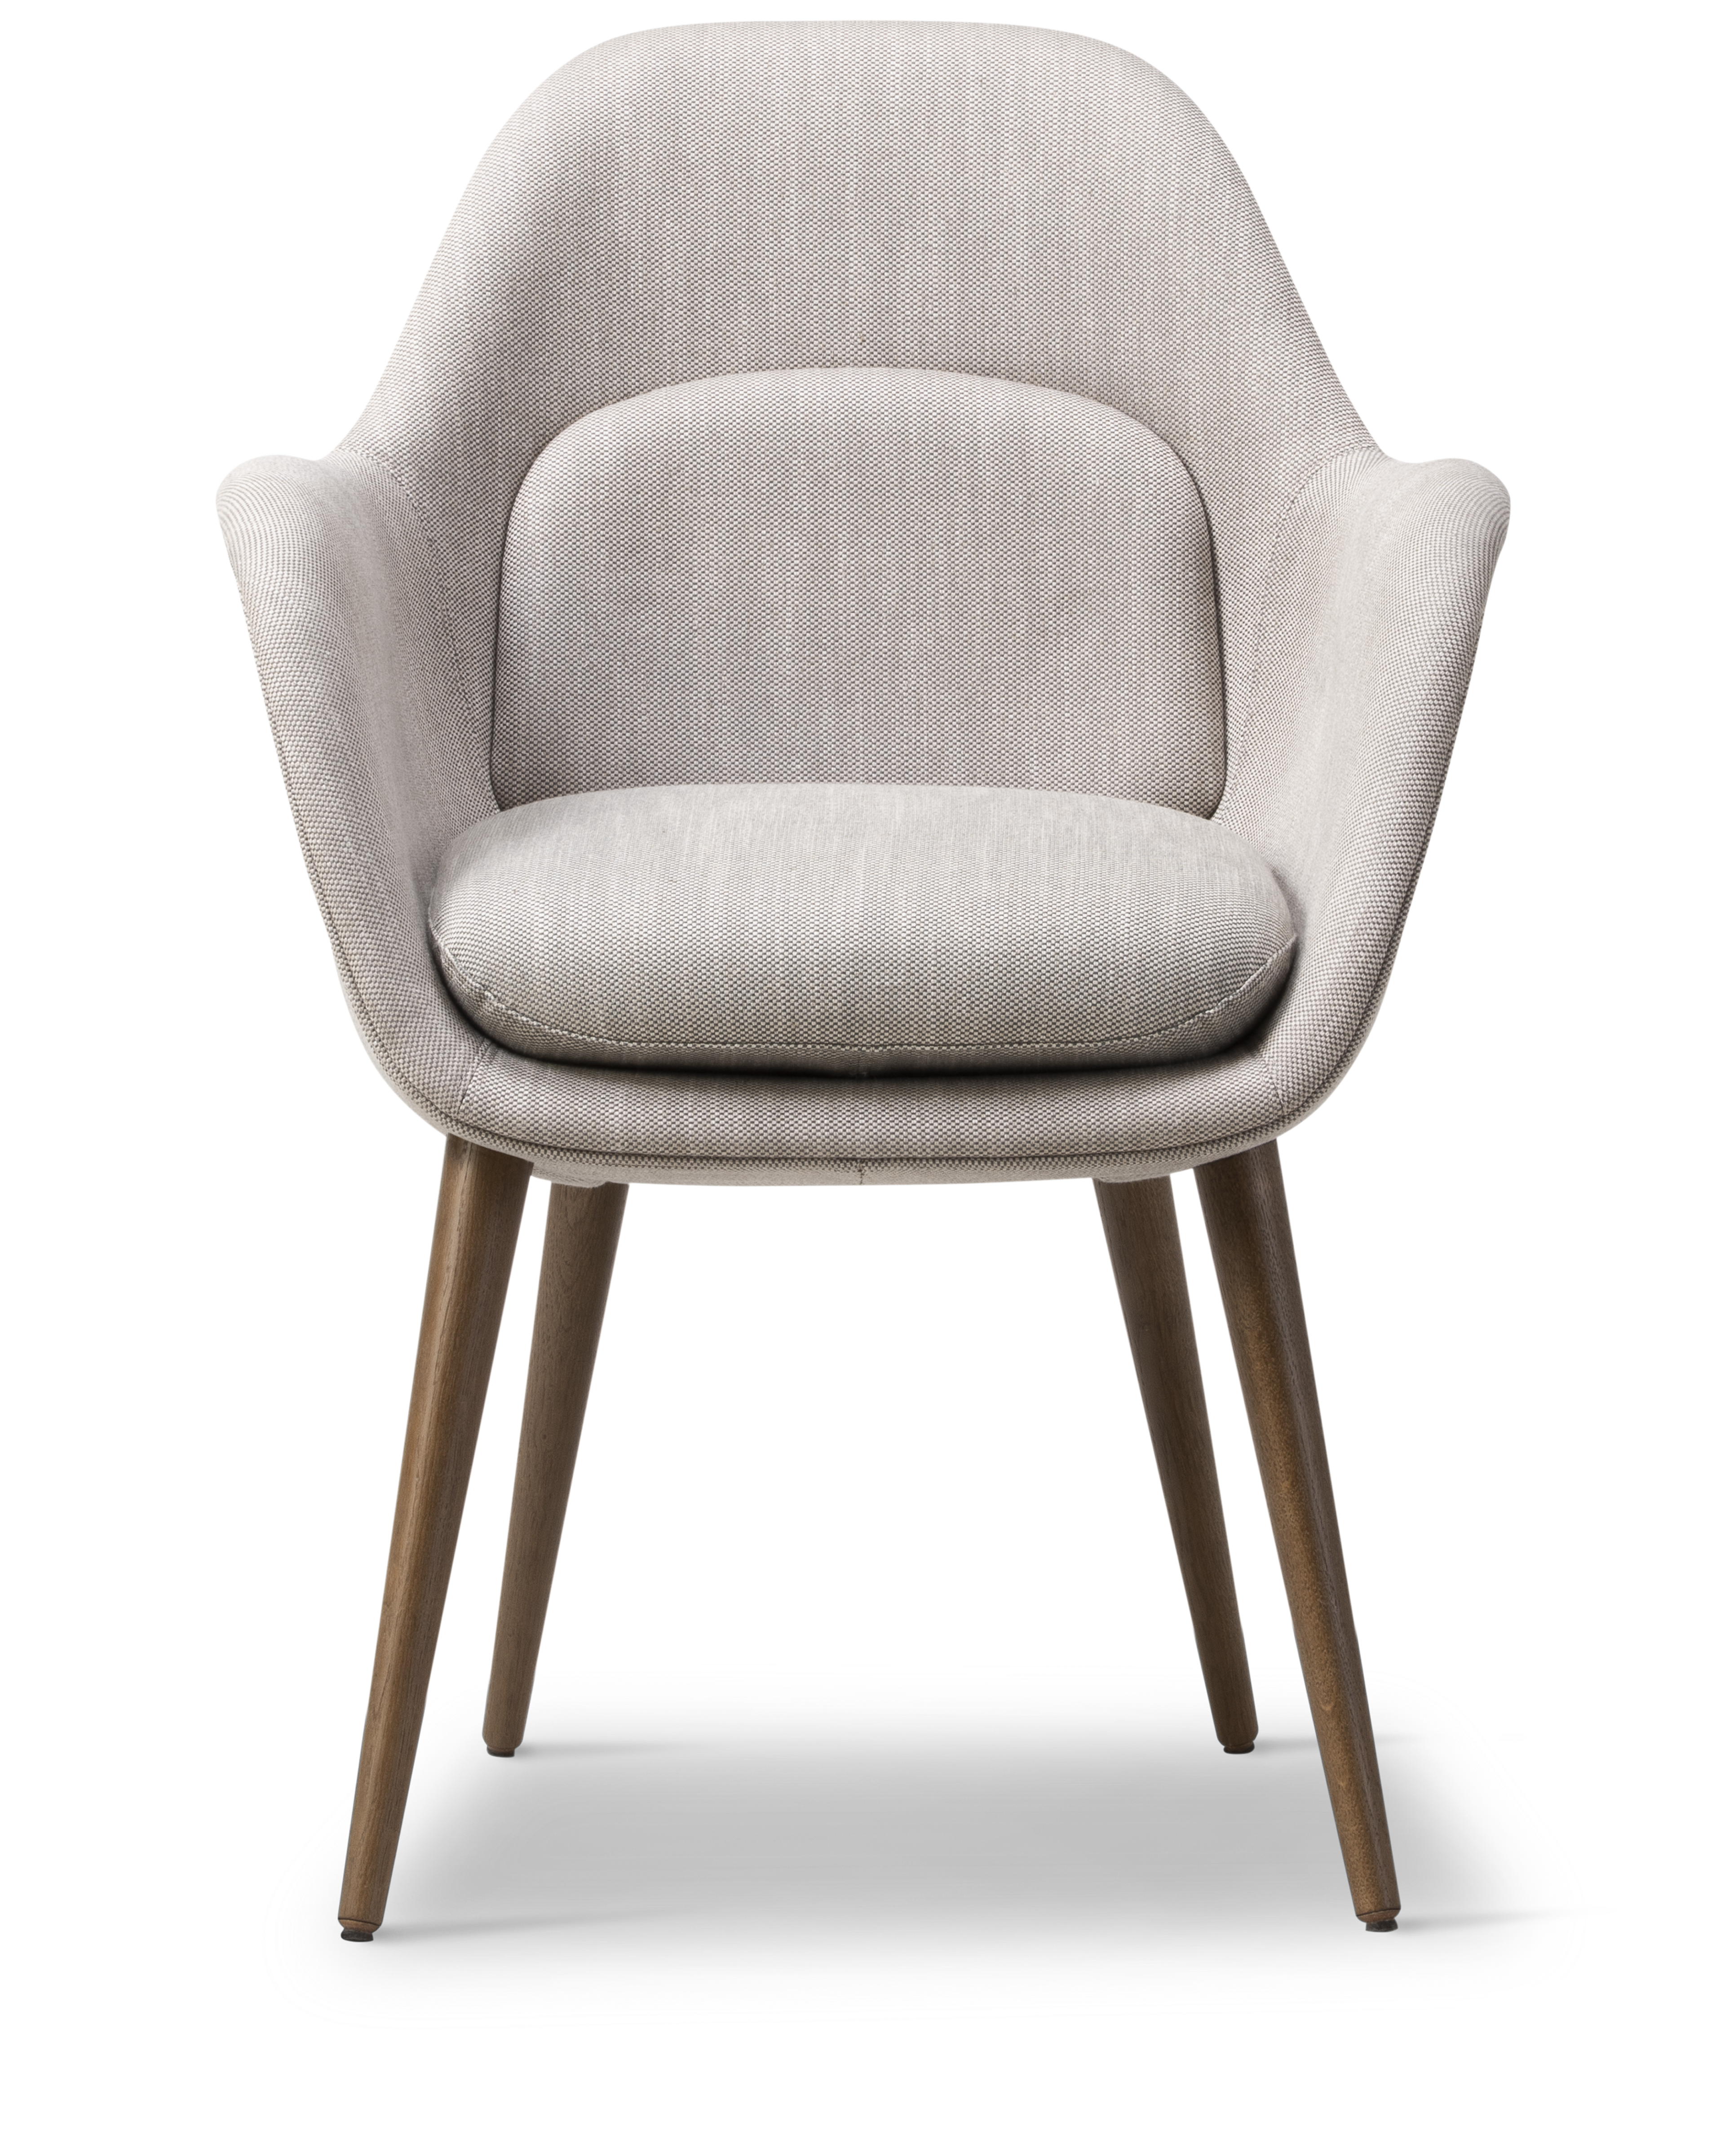 Swoon Dining Chair - Sinequanon 001 / Smoked oak